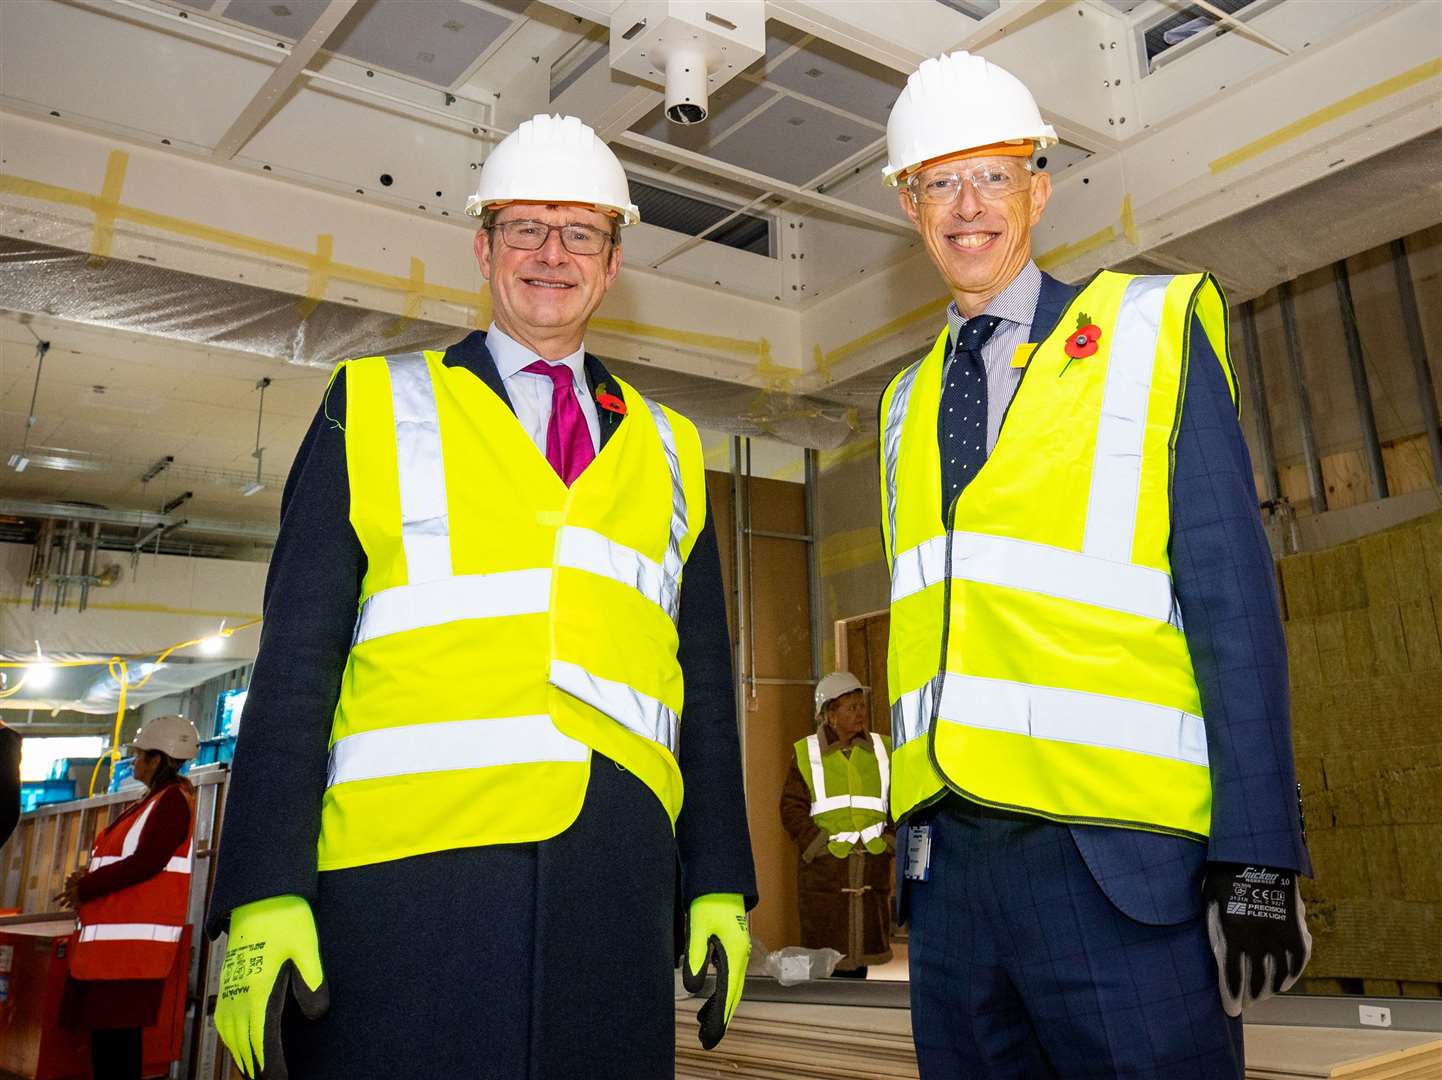 MP Greg Clark and Miles Scott pictured in the new operating theatre